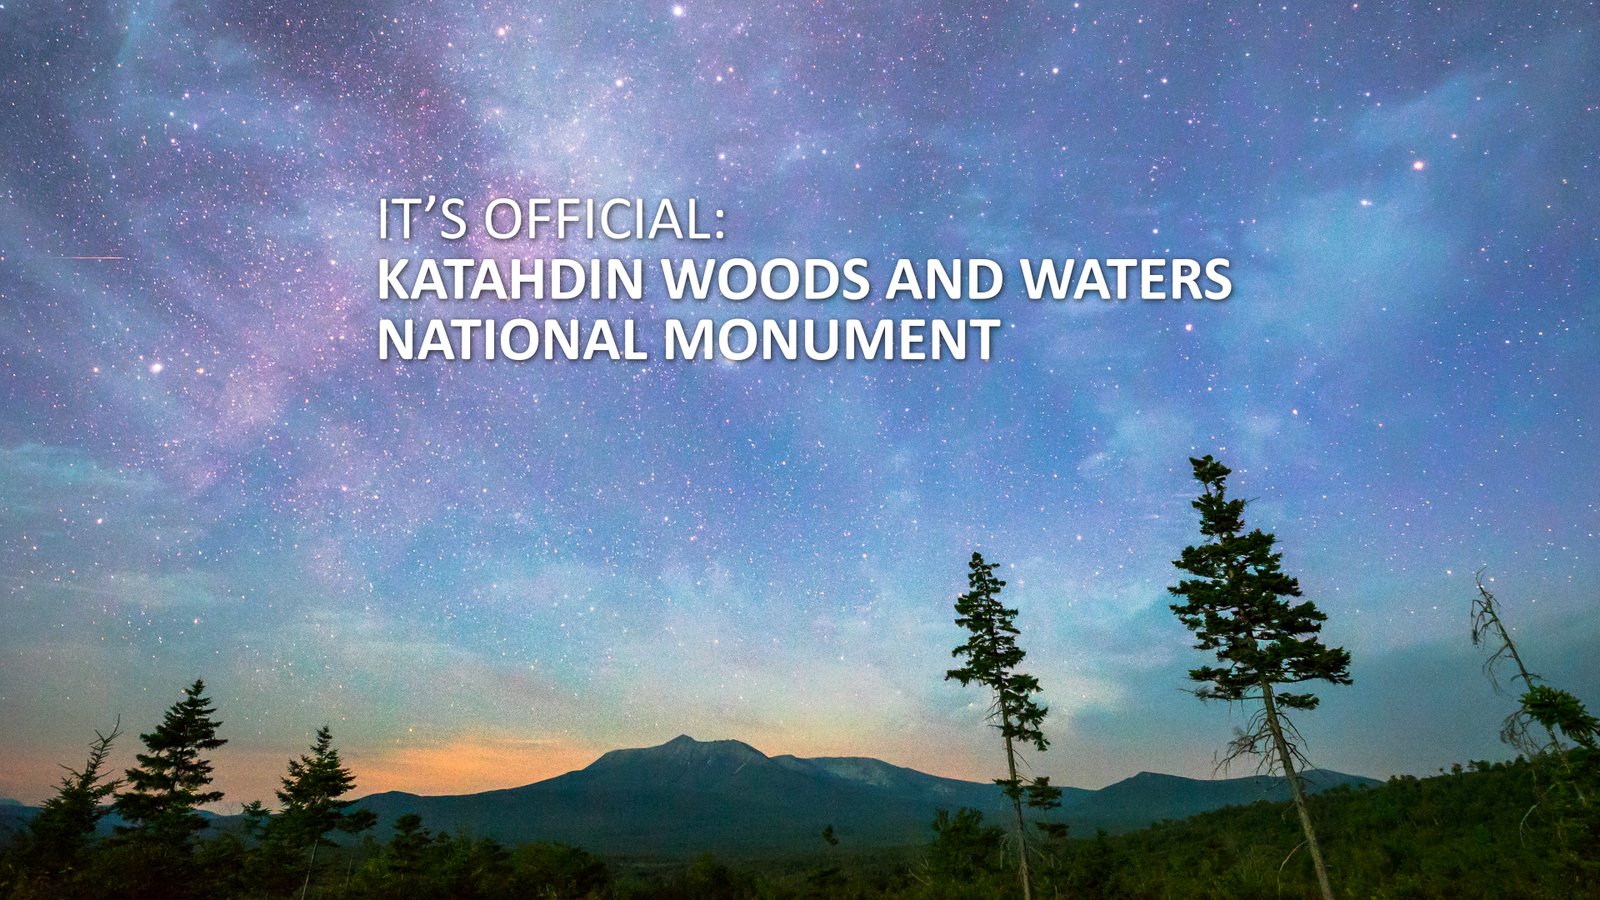 KataHDin Woods And Waters National Monument Proclamation